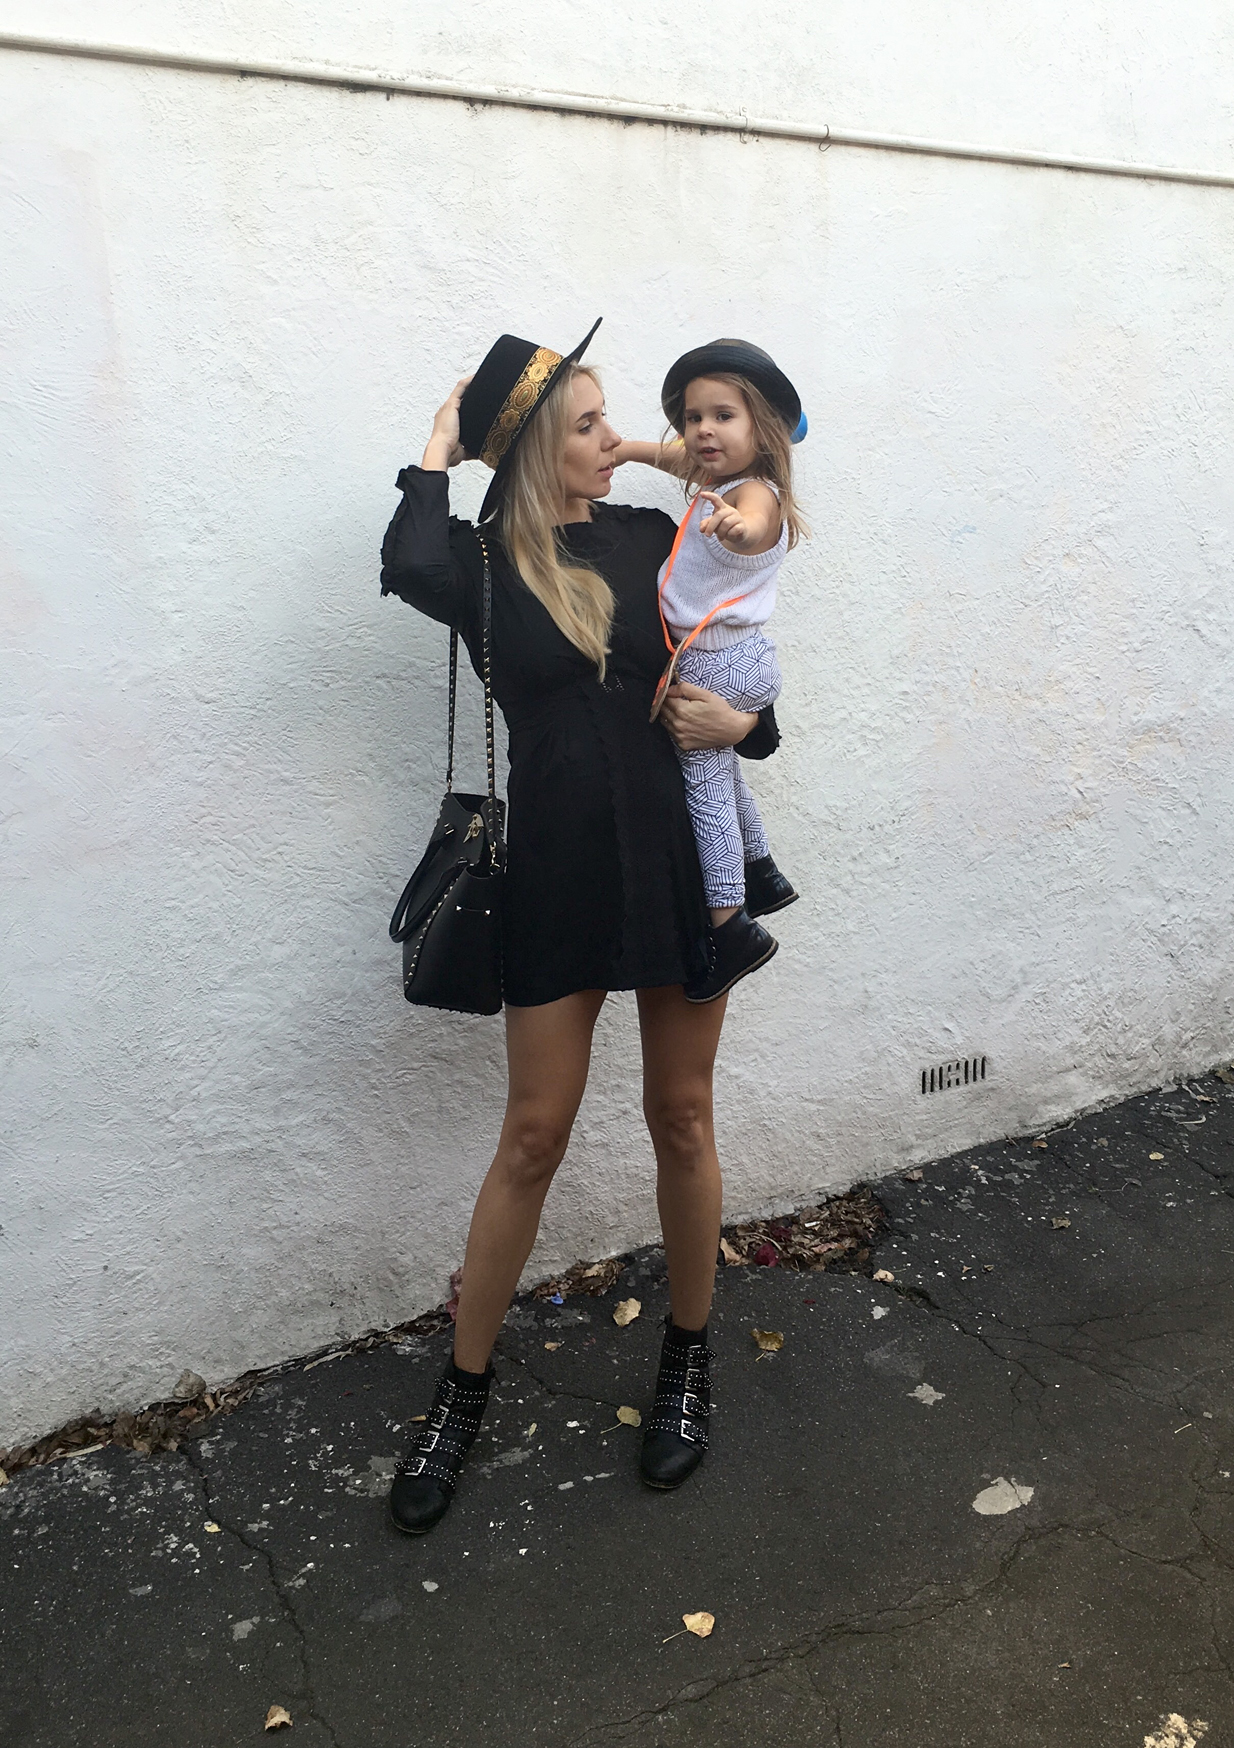 Monochrome joggers. Mommy and me street style